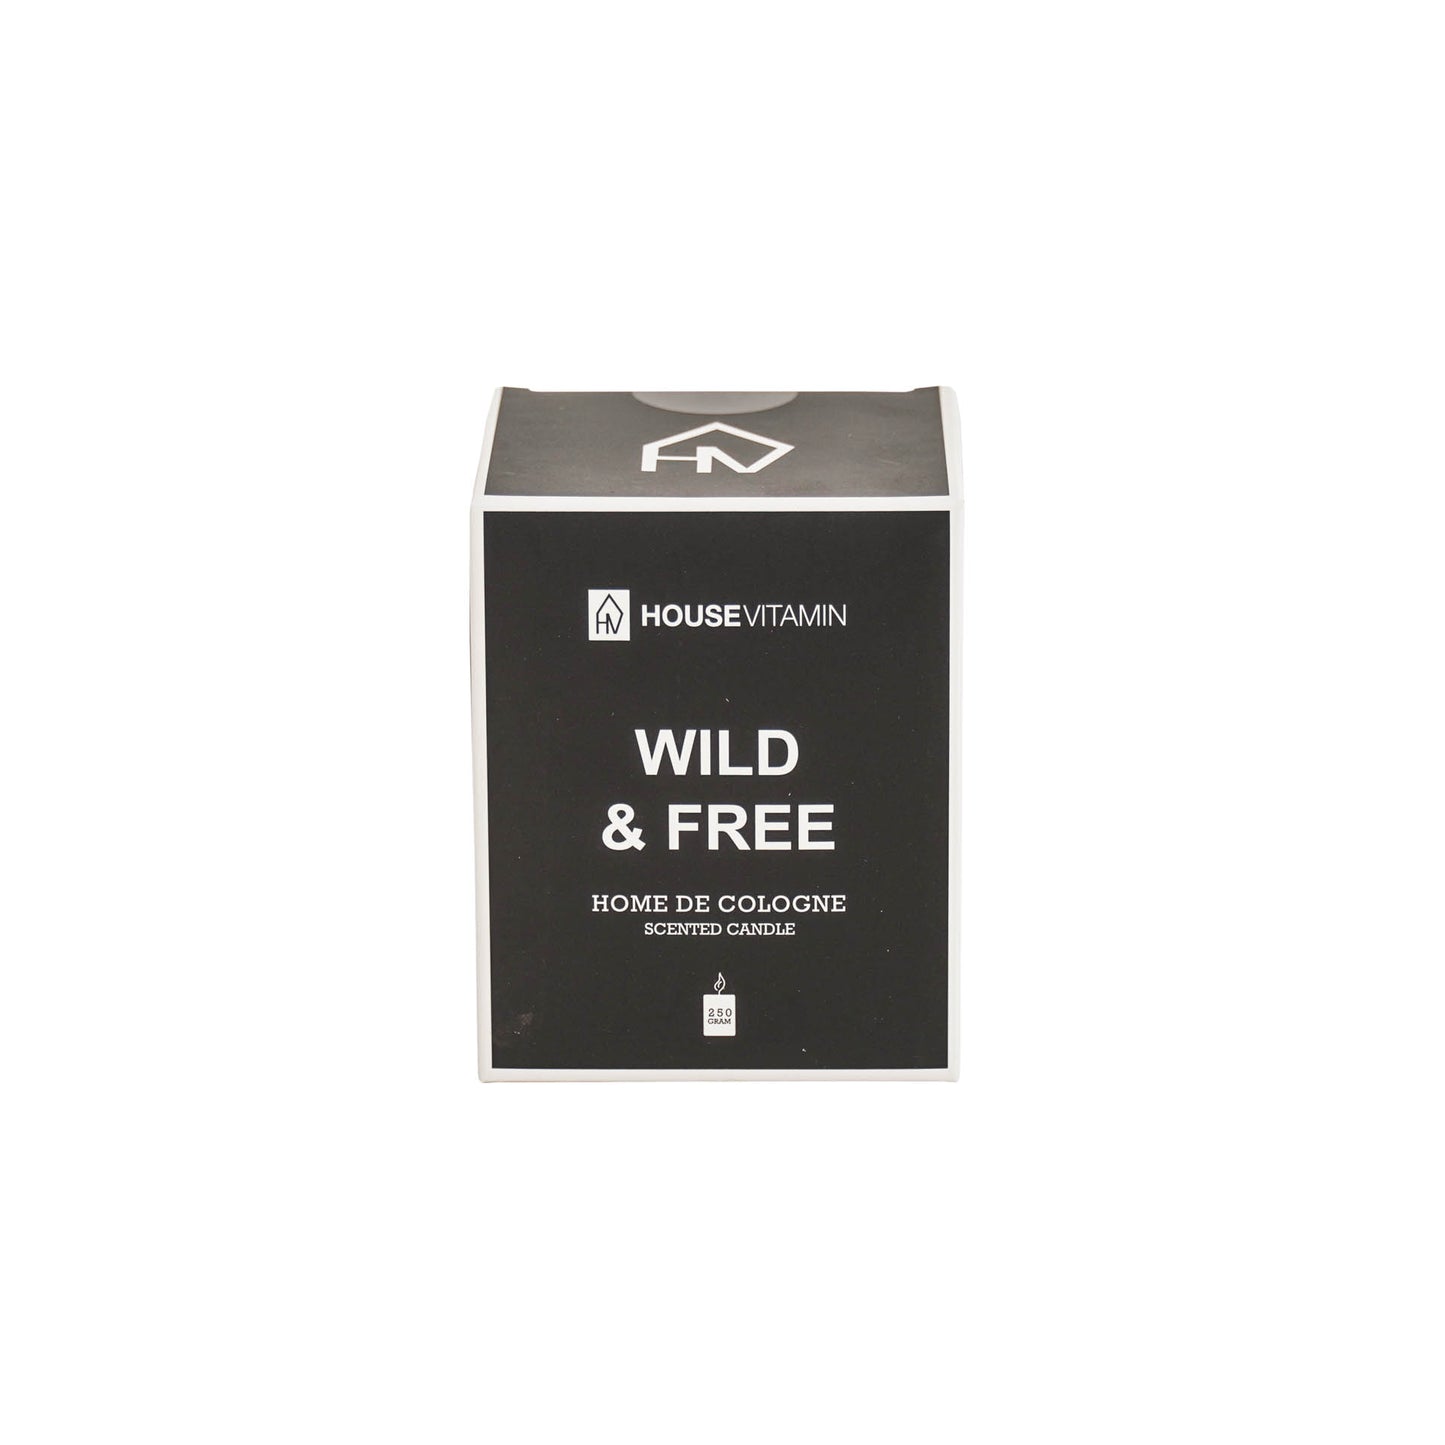 Housevitamin Home de Cologne Geurkaars - 250gr - Wild and free